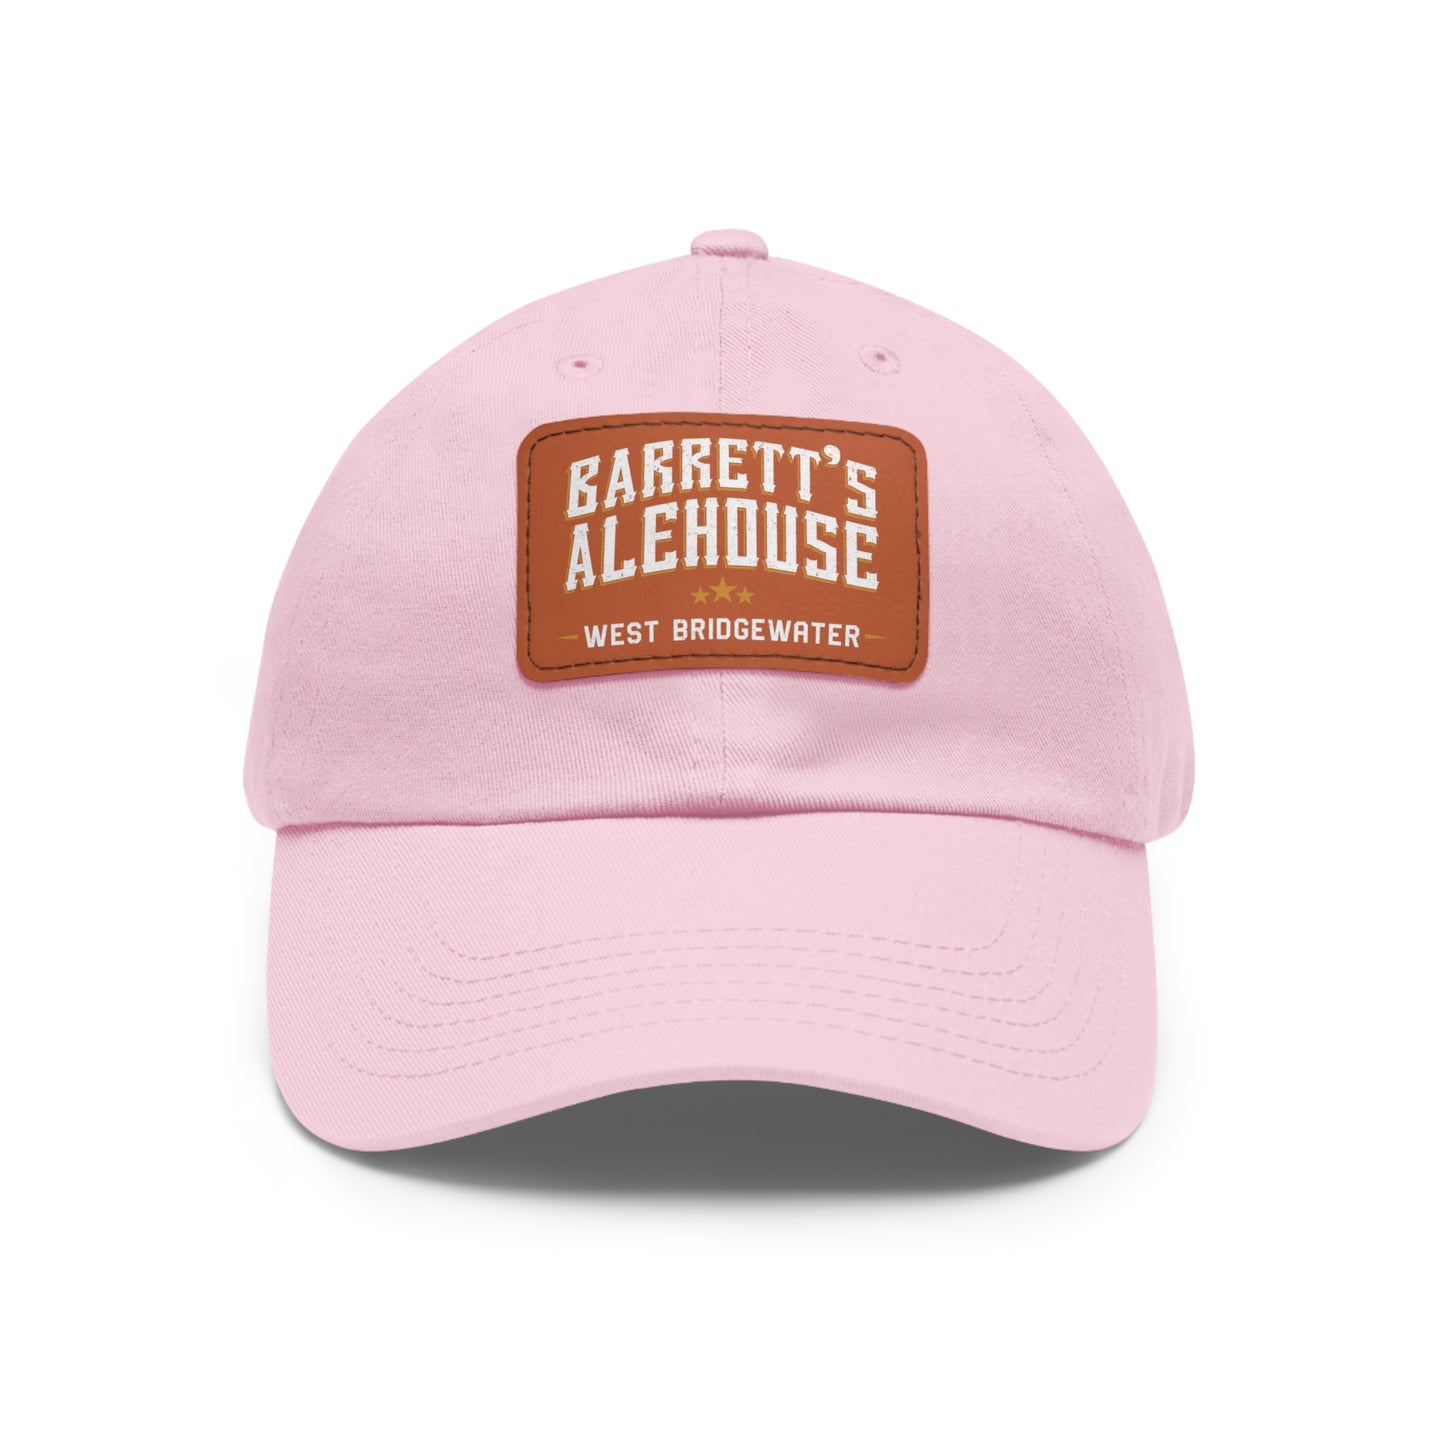 Barrett's Alehouse West Bridgewater Dad Hat with Leather Patch